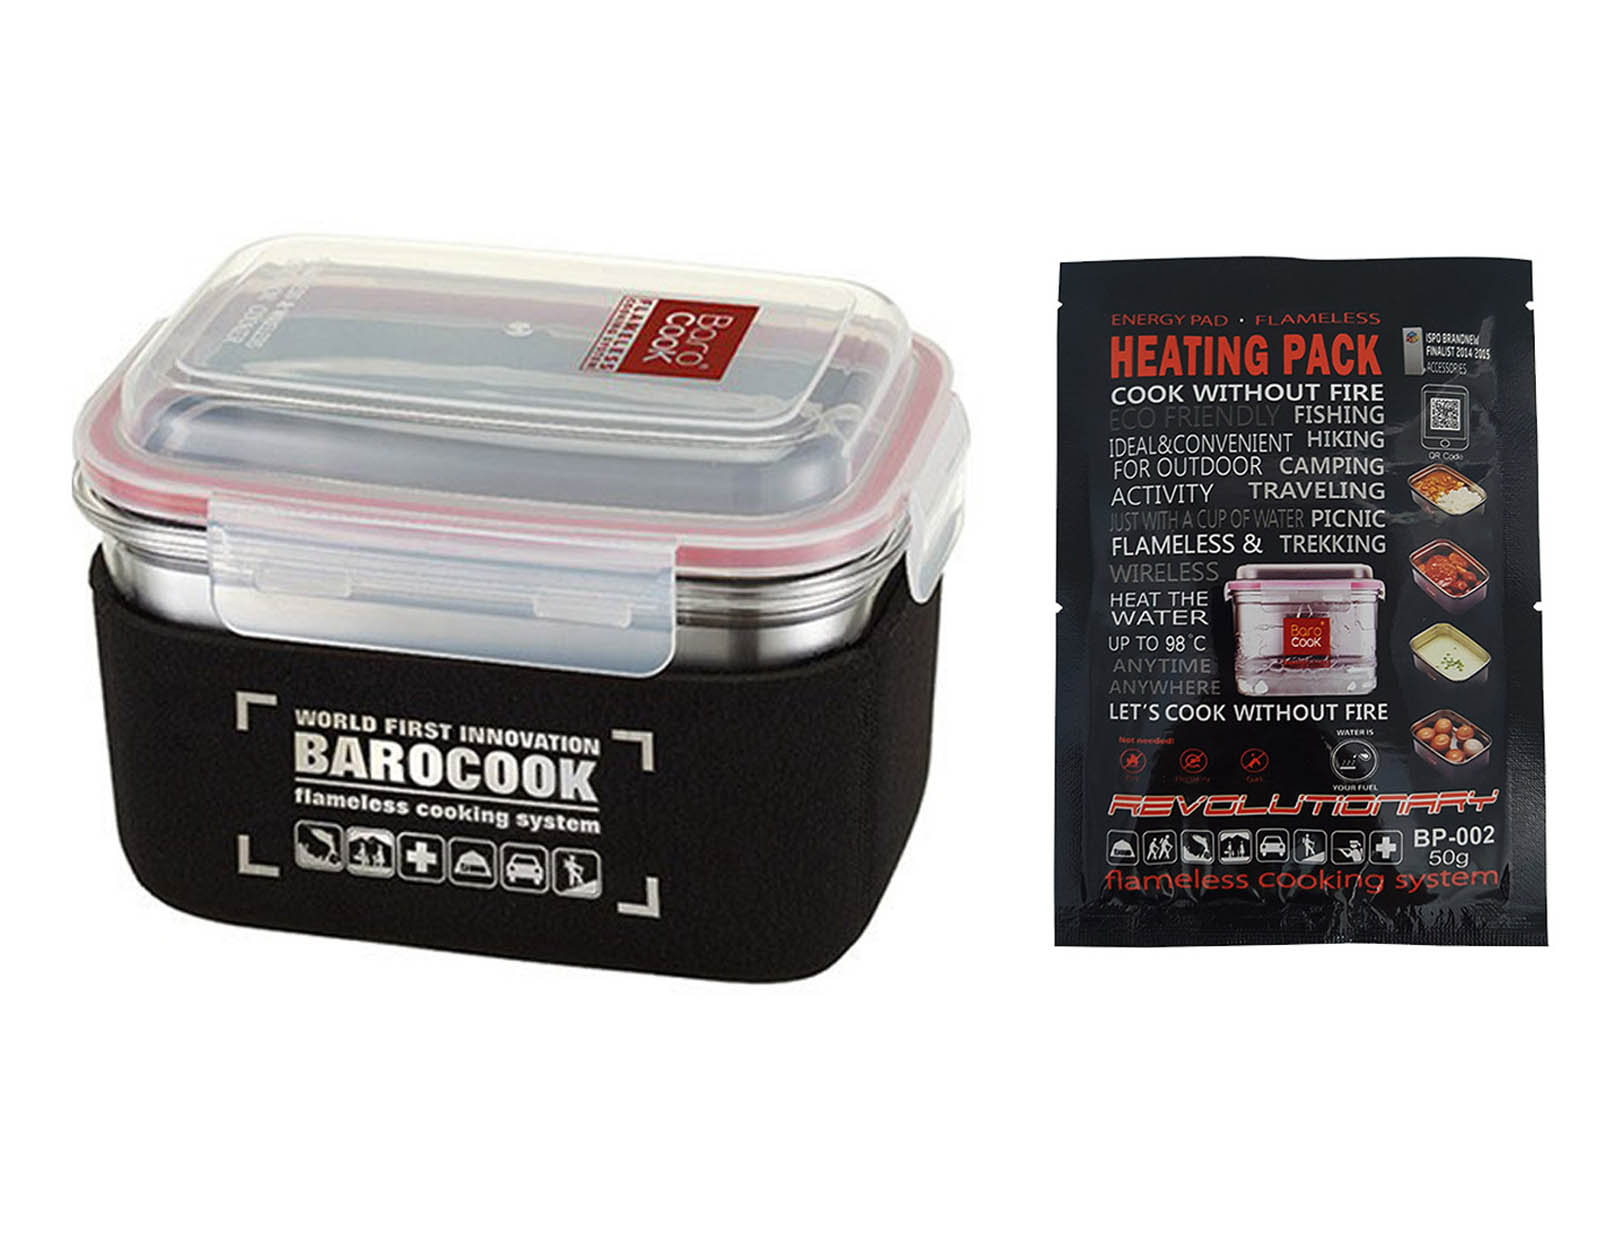 Cook without fuel or fire Barocook Flameless Cooker Rectangle US Distributor 